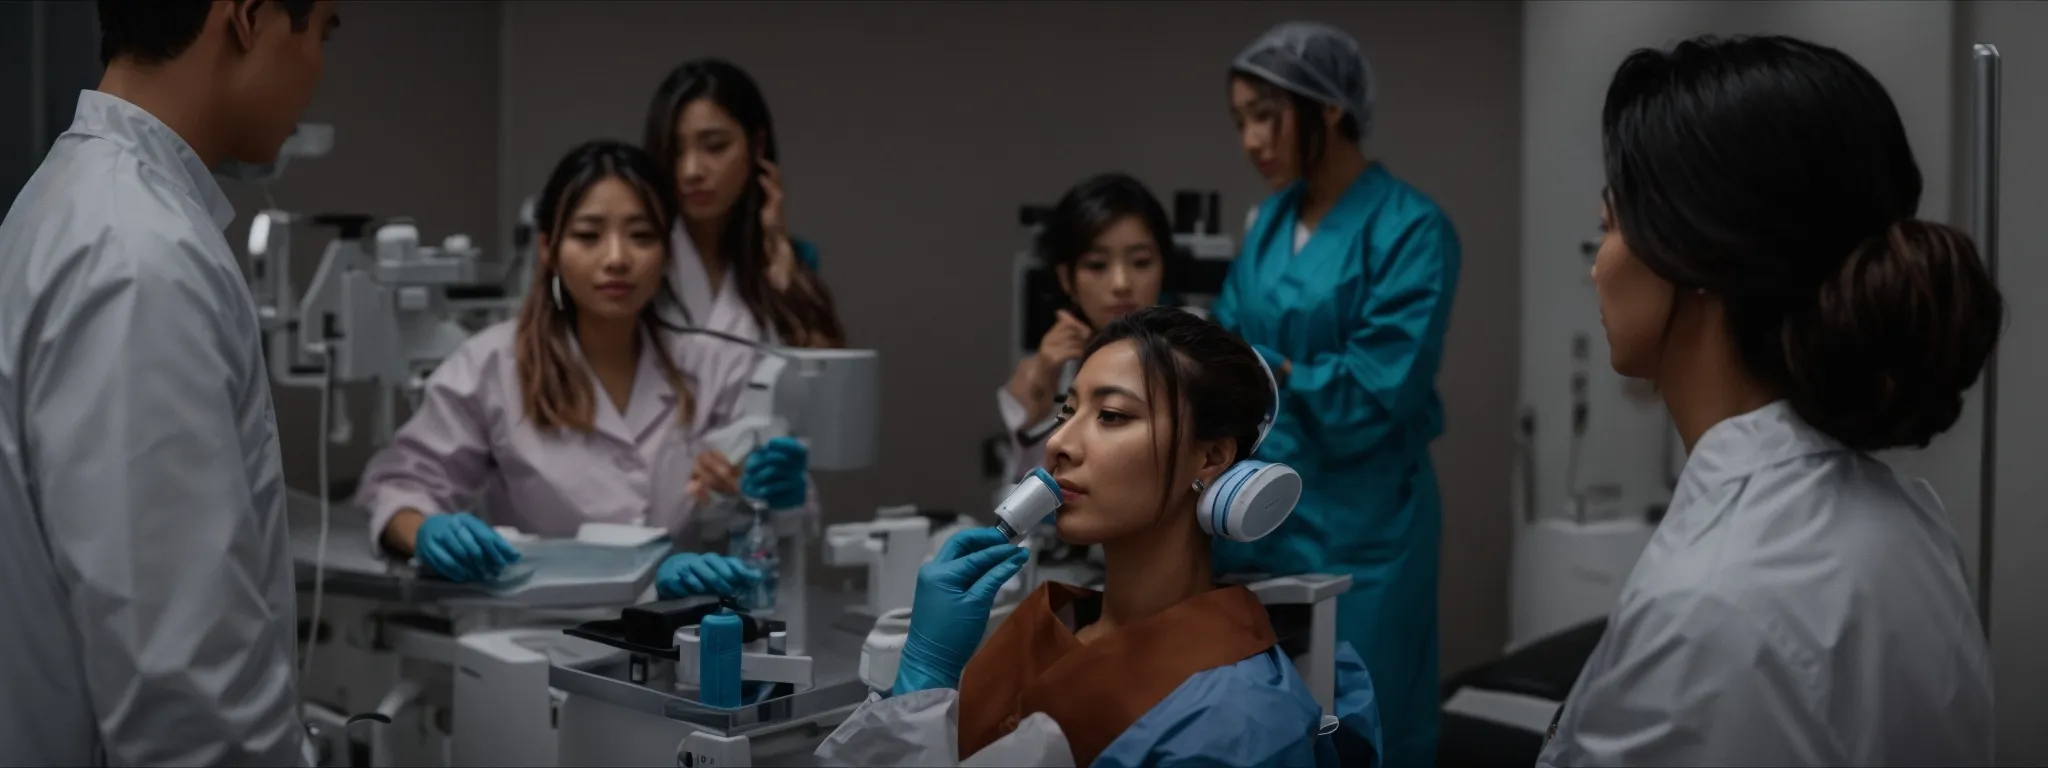 a plastic surgeon is engaging with an audience through a live social media video, discussing transformative procedures without showing specific results or private details.